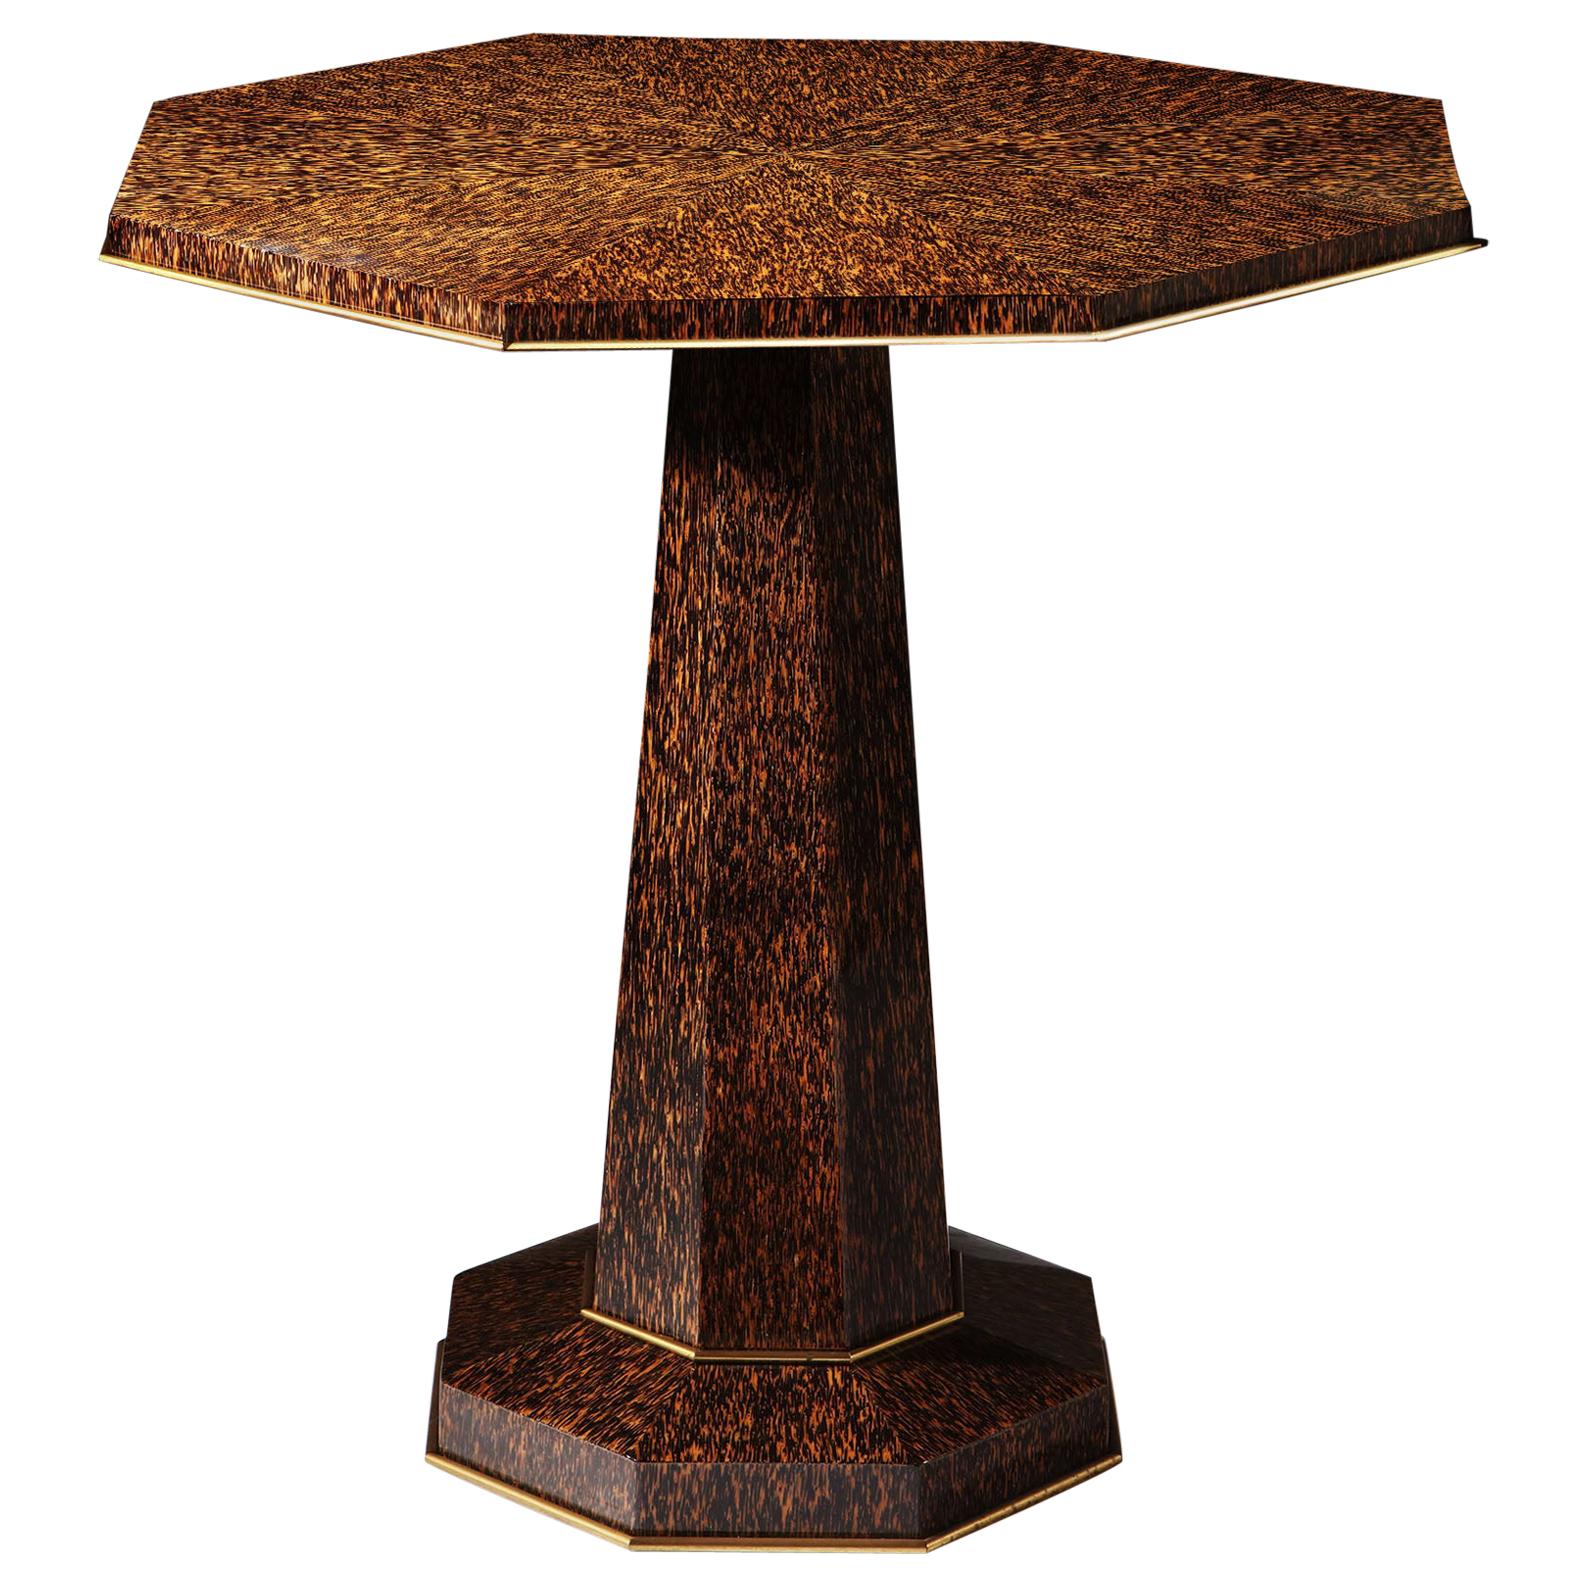 20th Century Octagonal Palm Wood Centre Table in the Art Deco Style